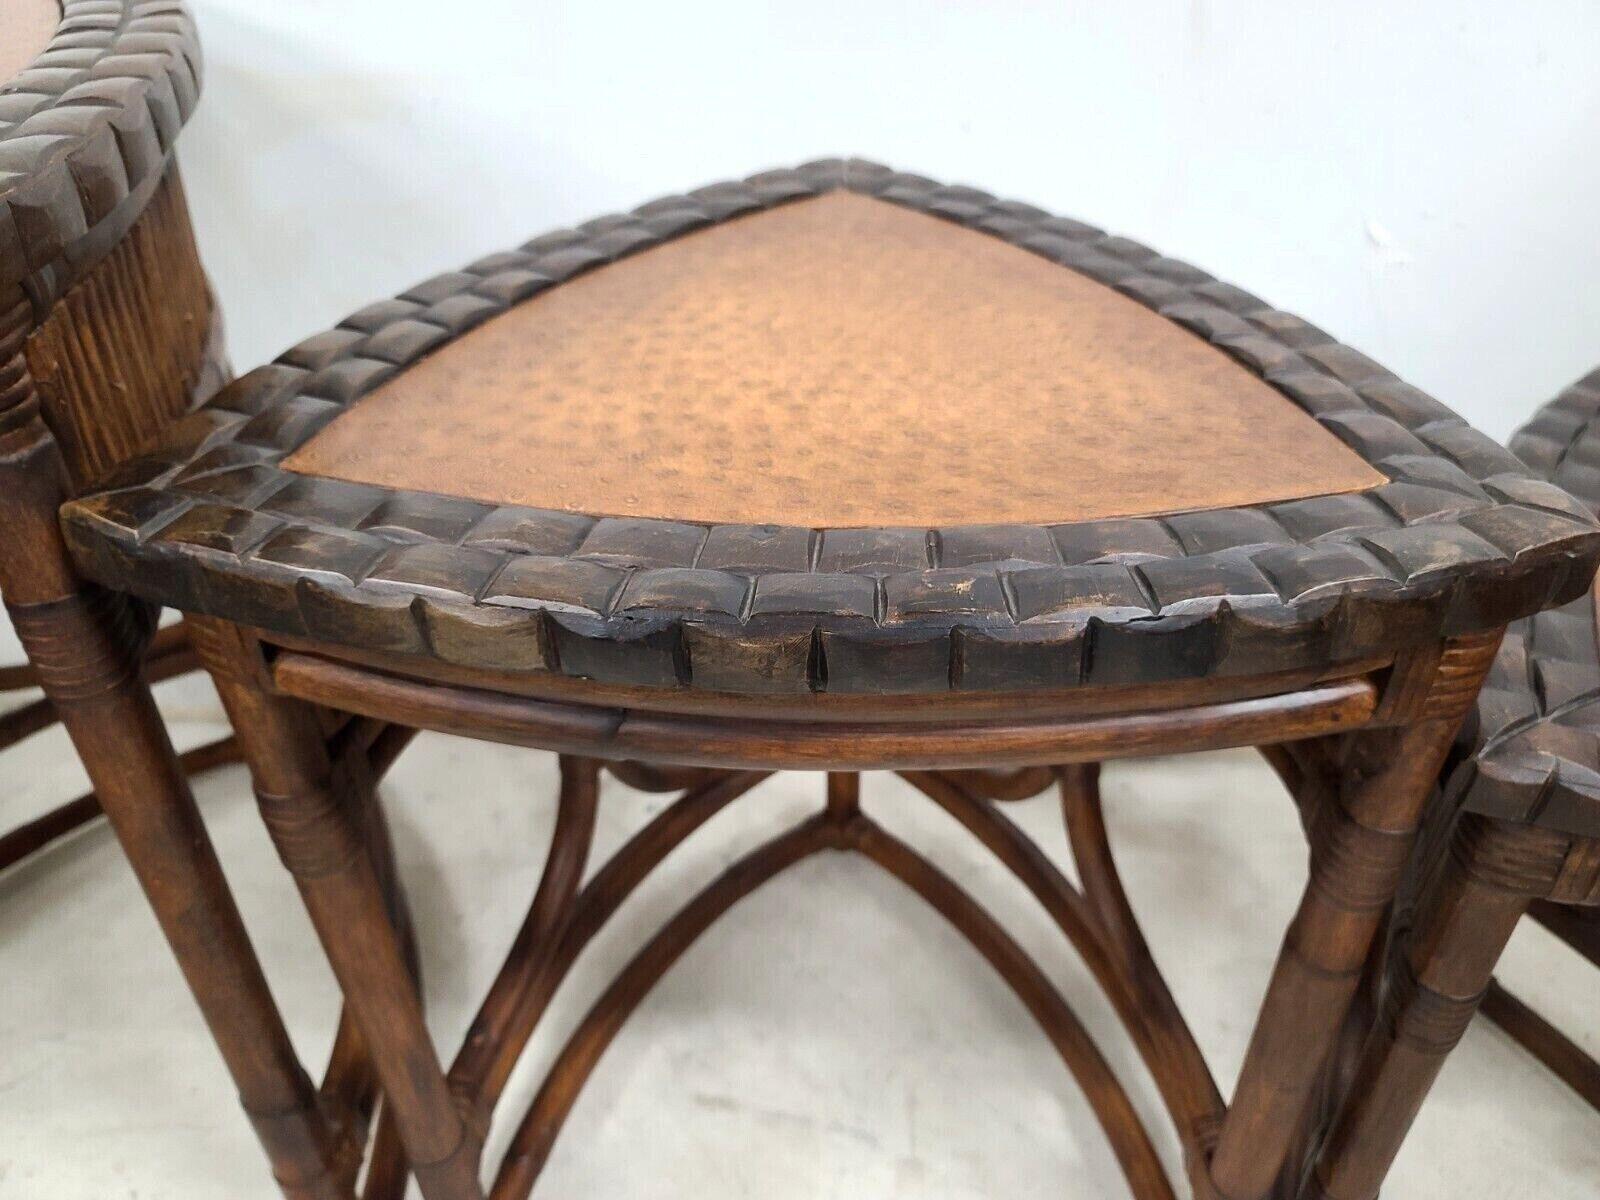 Vintage Bamboo Rattan Coconut Shell Ostrich Nesting Tables, Set of 3 For Sale 2